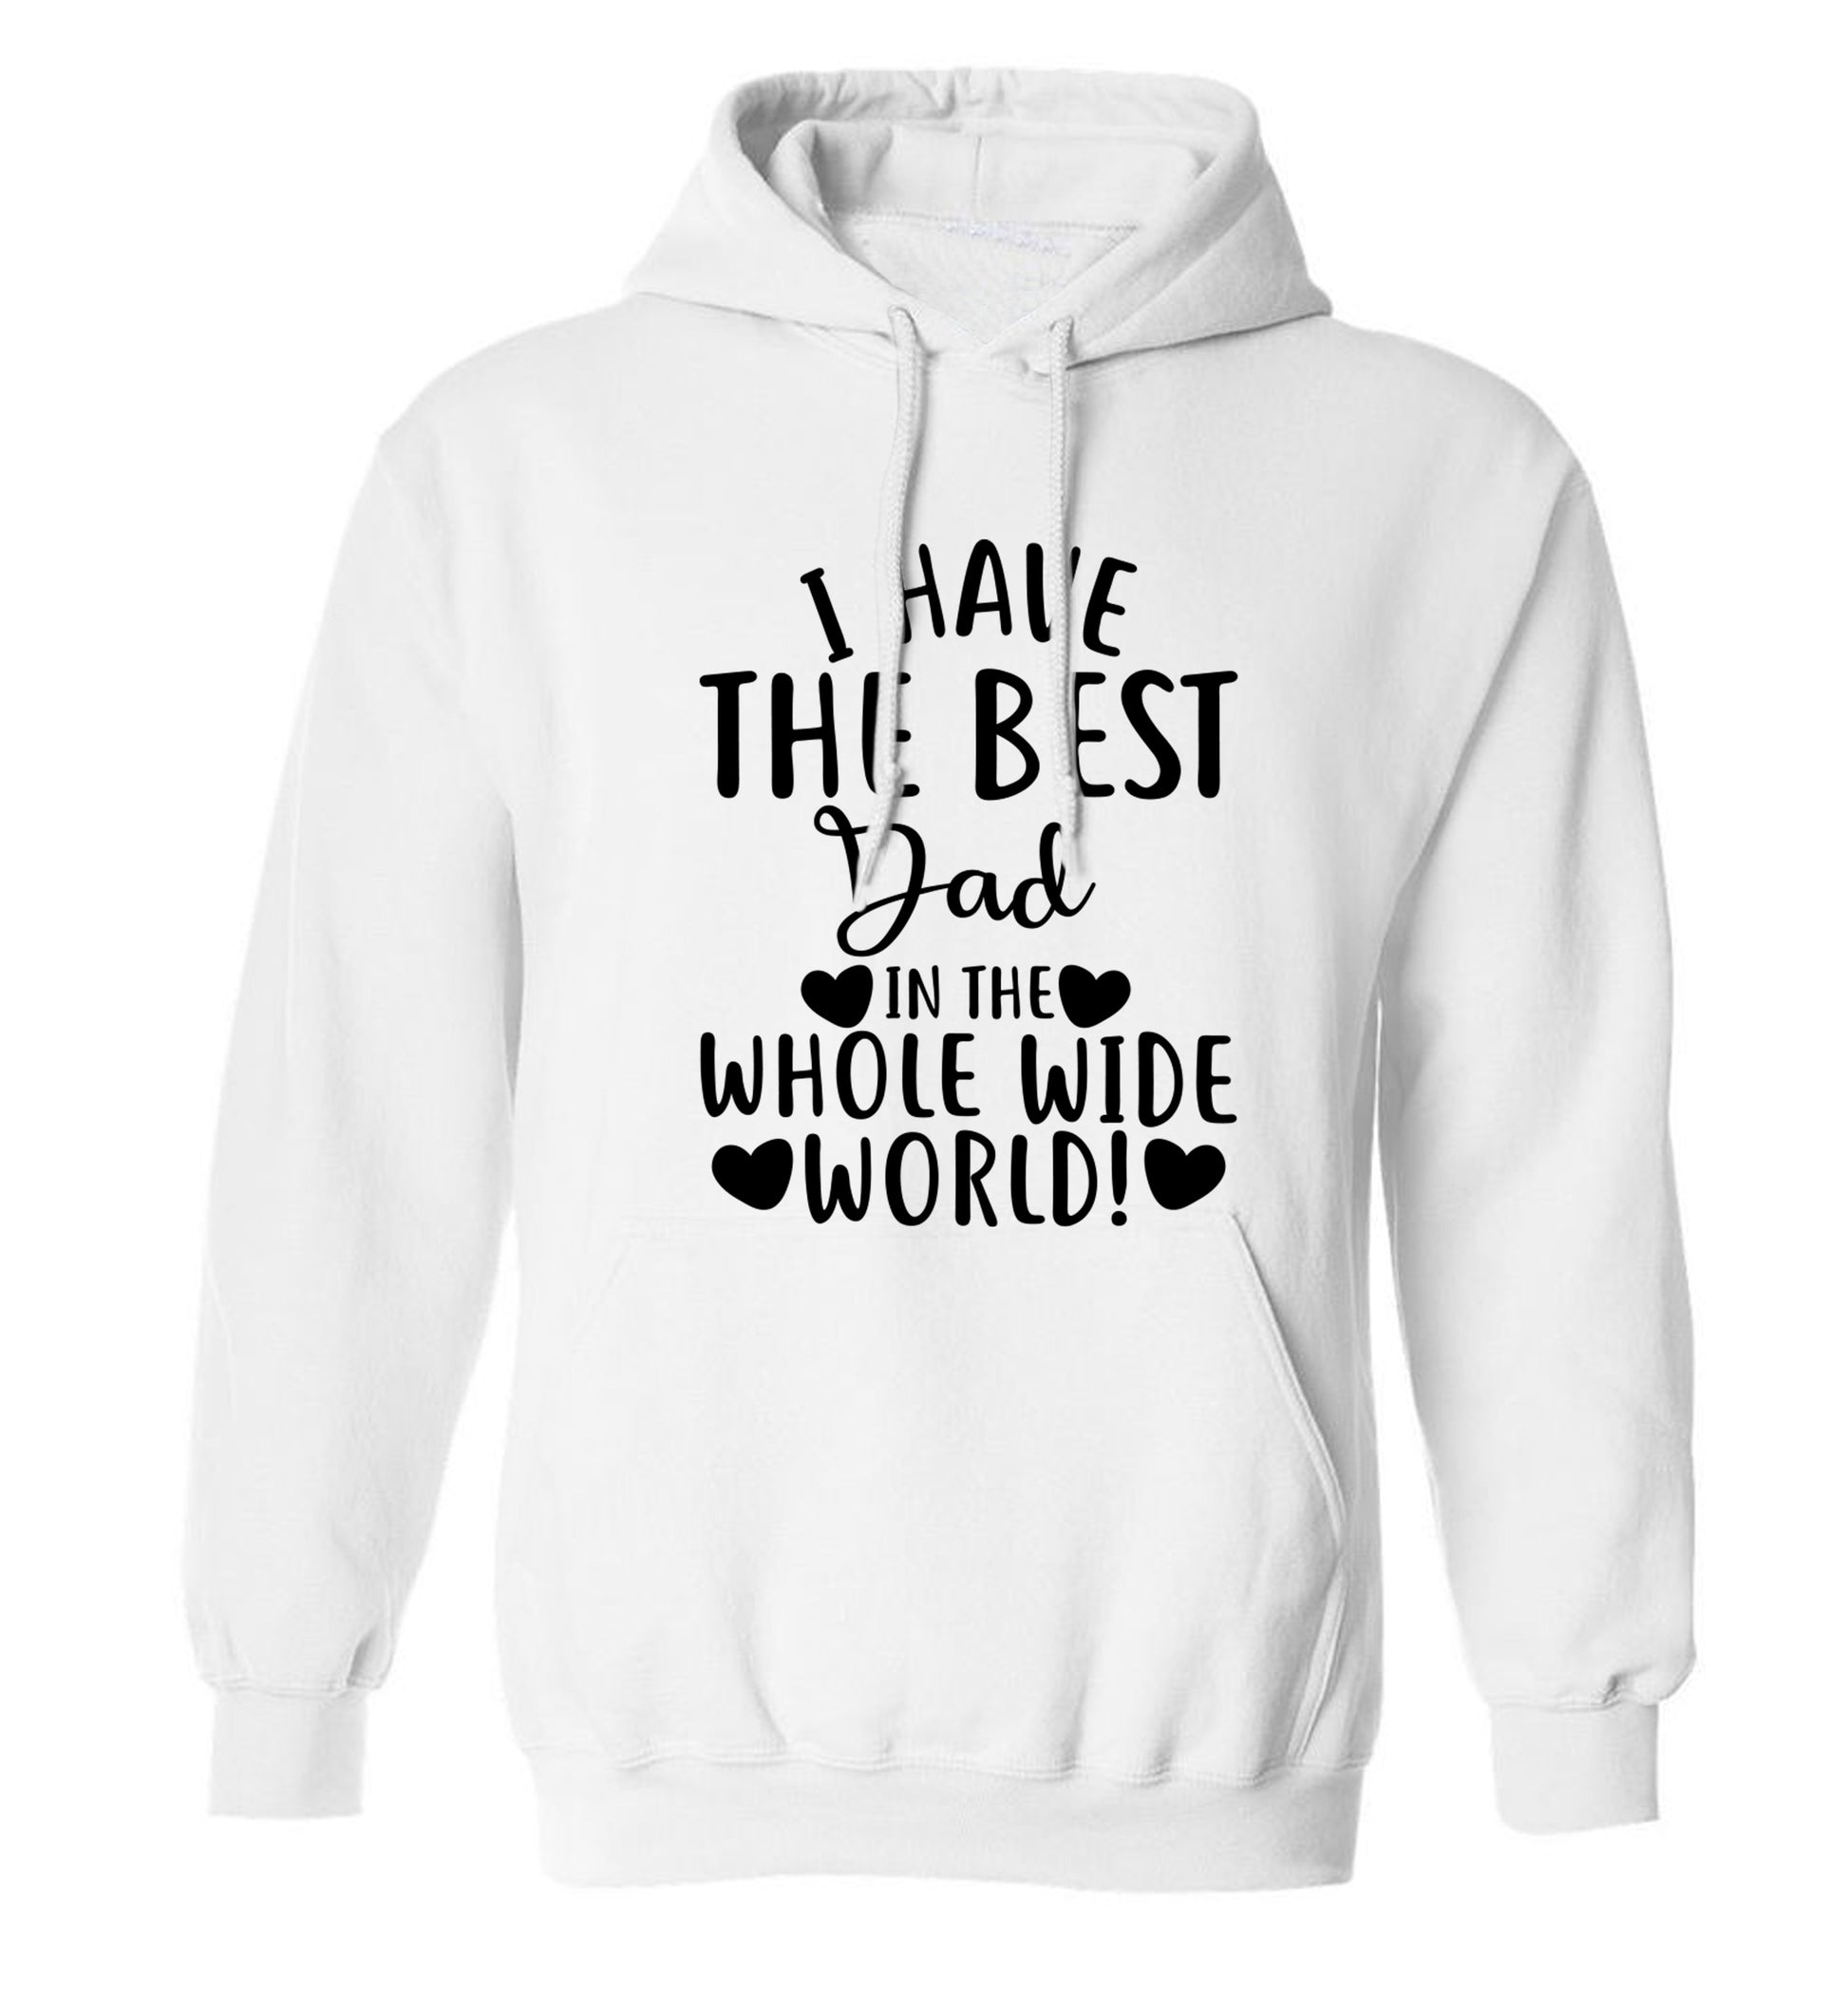 I have the best dad in the whole wide world! adults unisex white hoodie 2XL